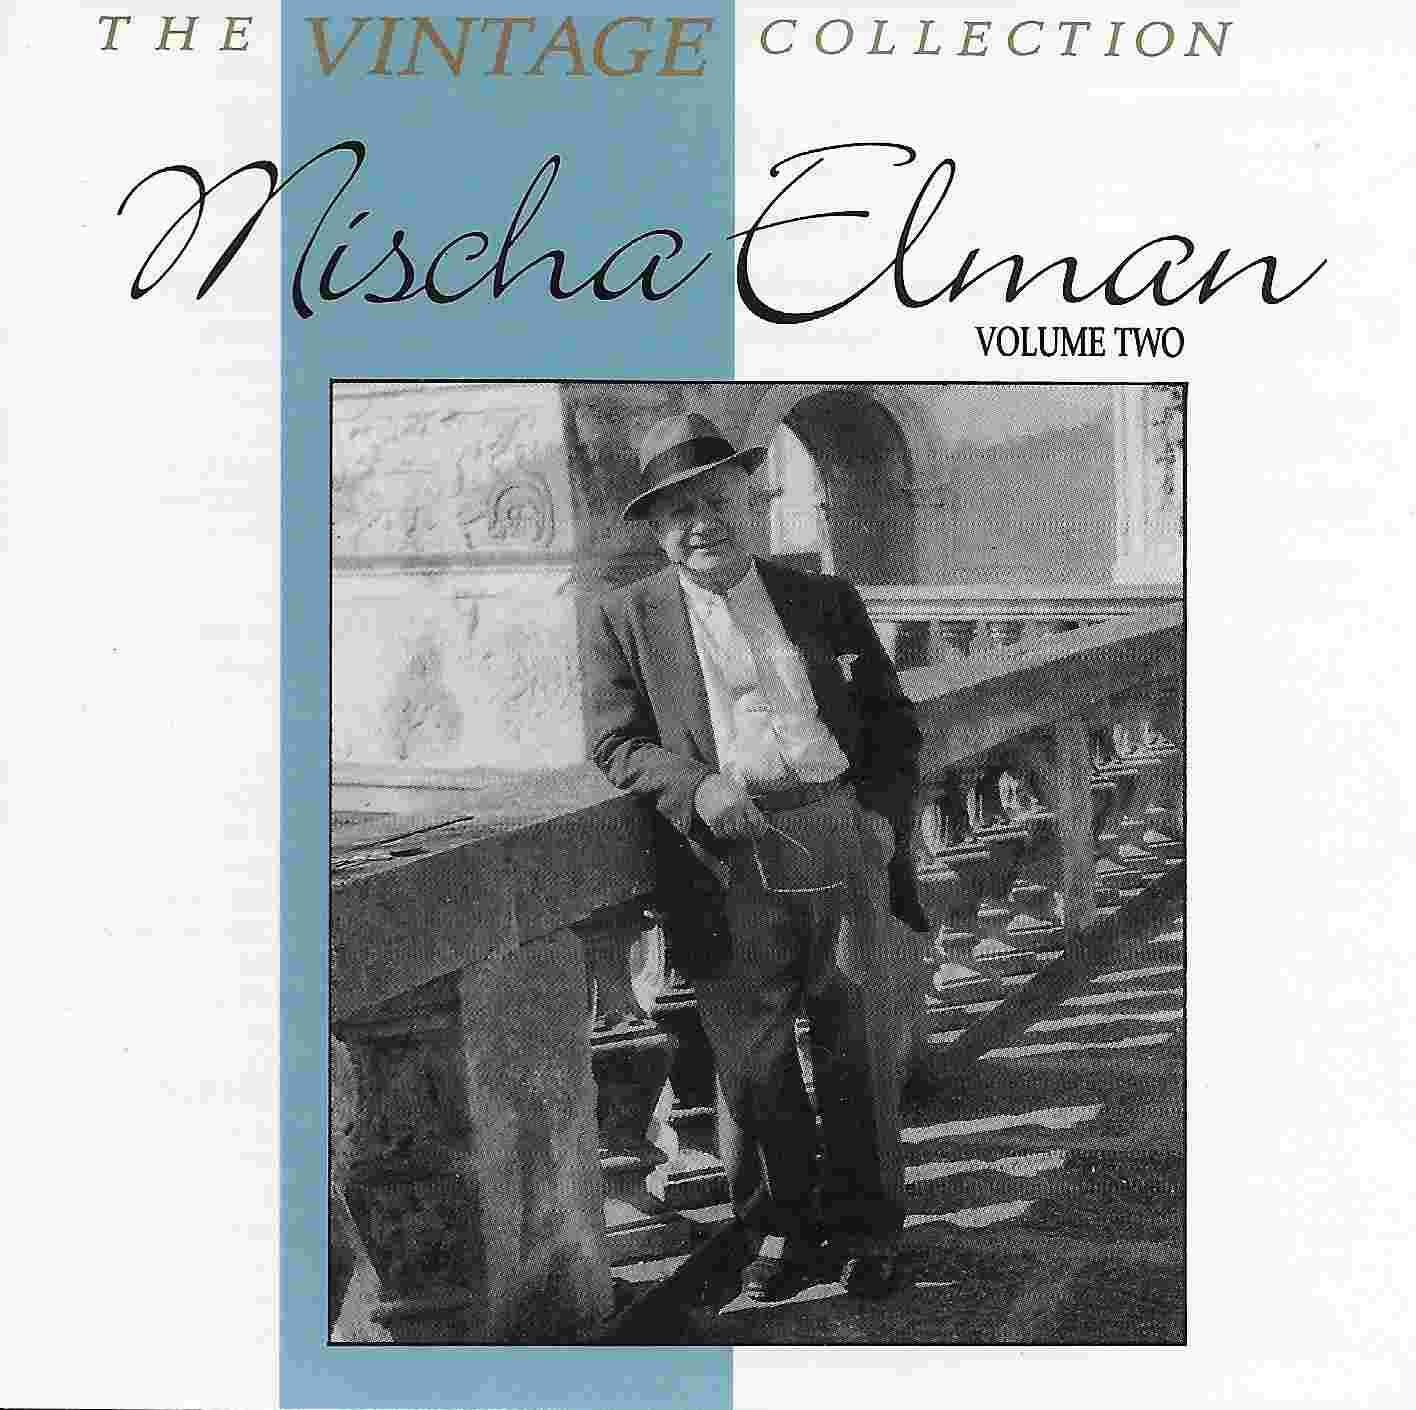 Picture of The vintage collection - Mischa Elman 2 by artist Mischa Elman from the BBC cds - Records and Tapes library